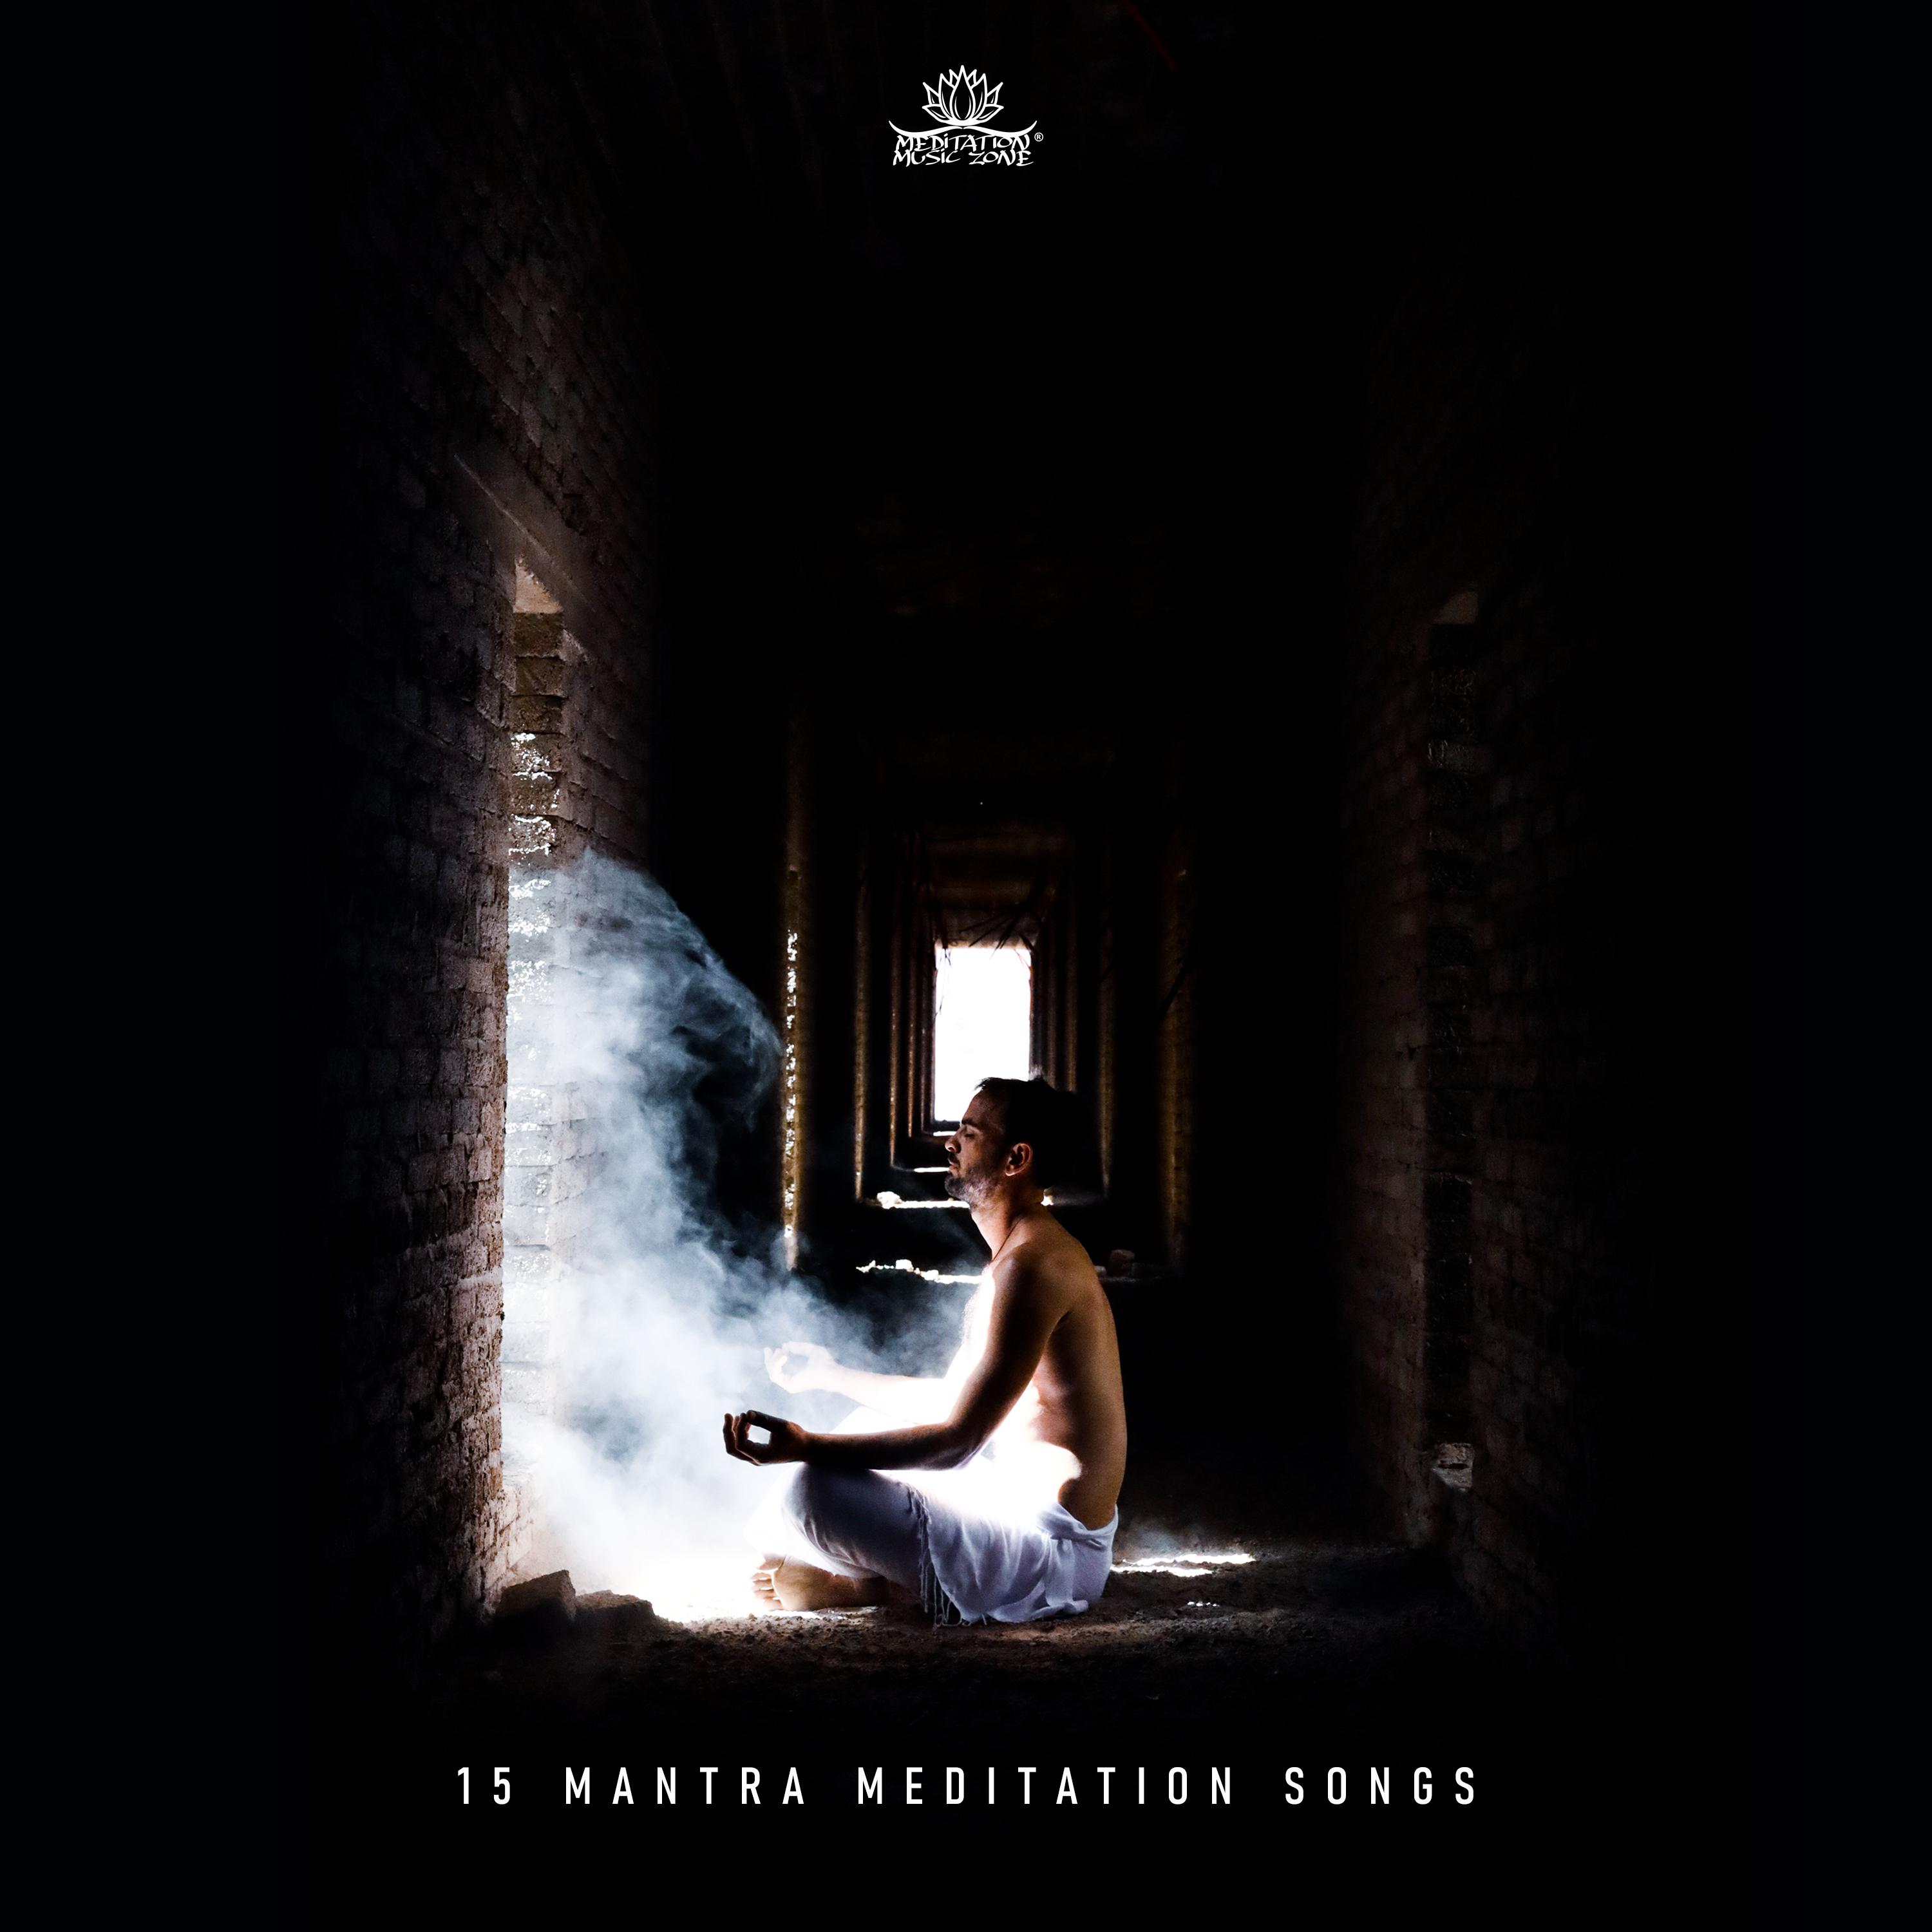 15 Mantra Meditation Songs (Concentration, Well Being, Balance)